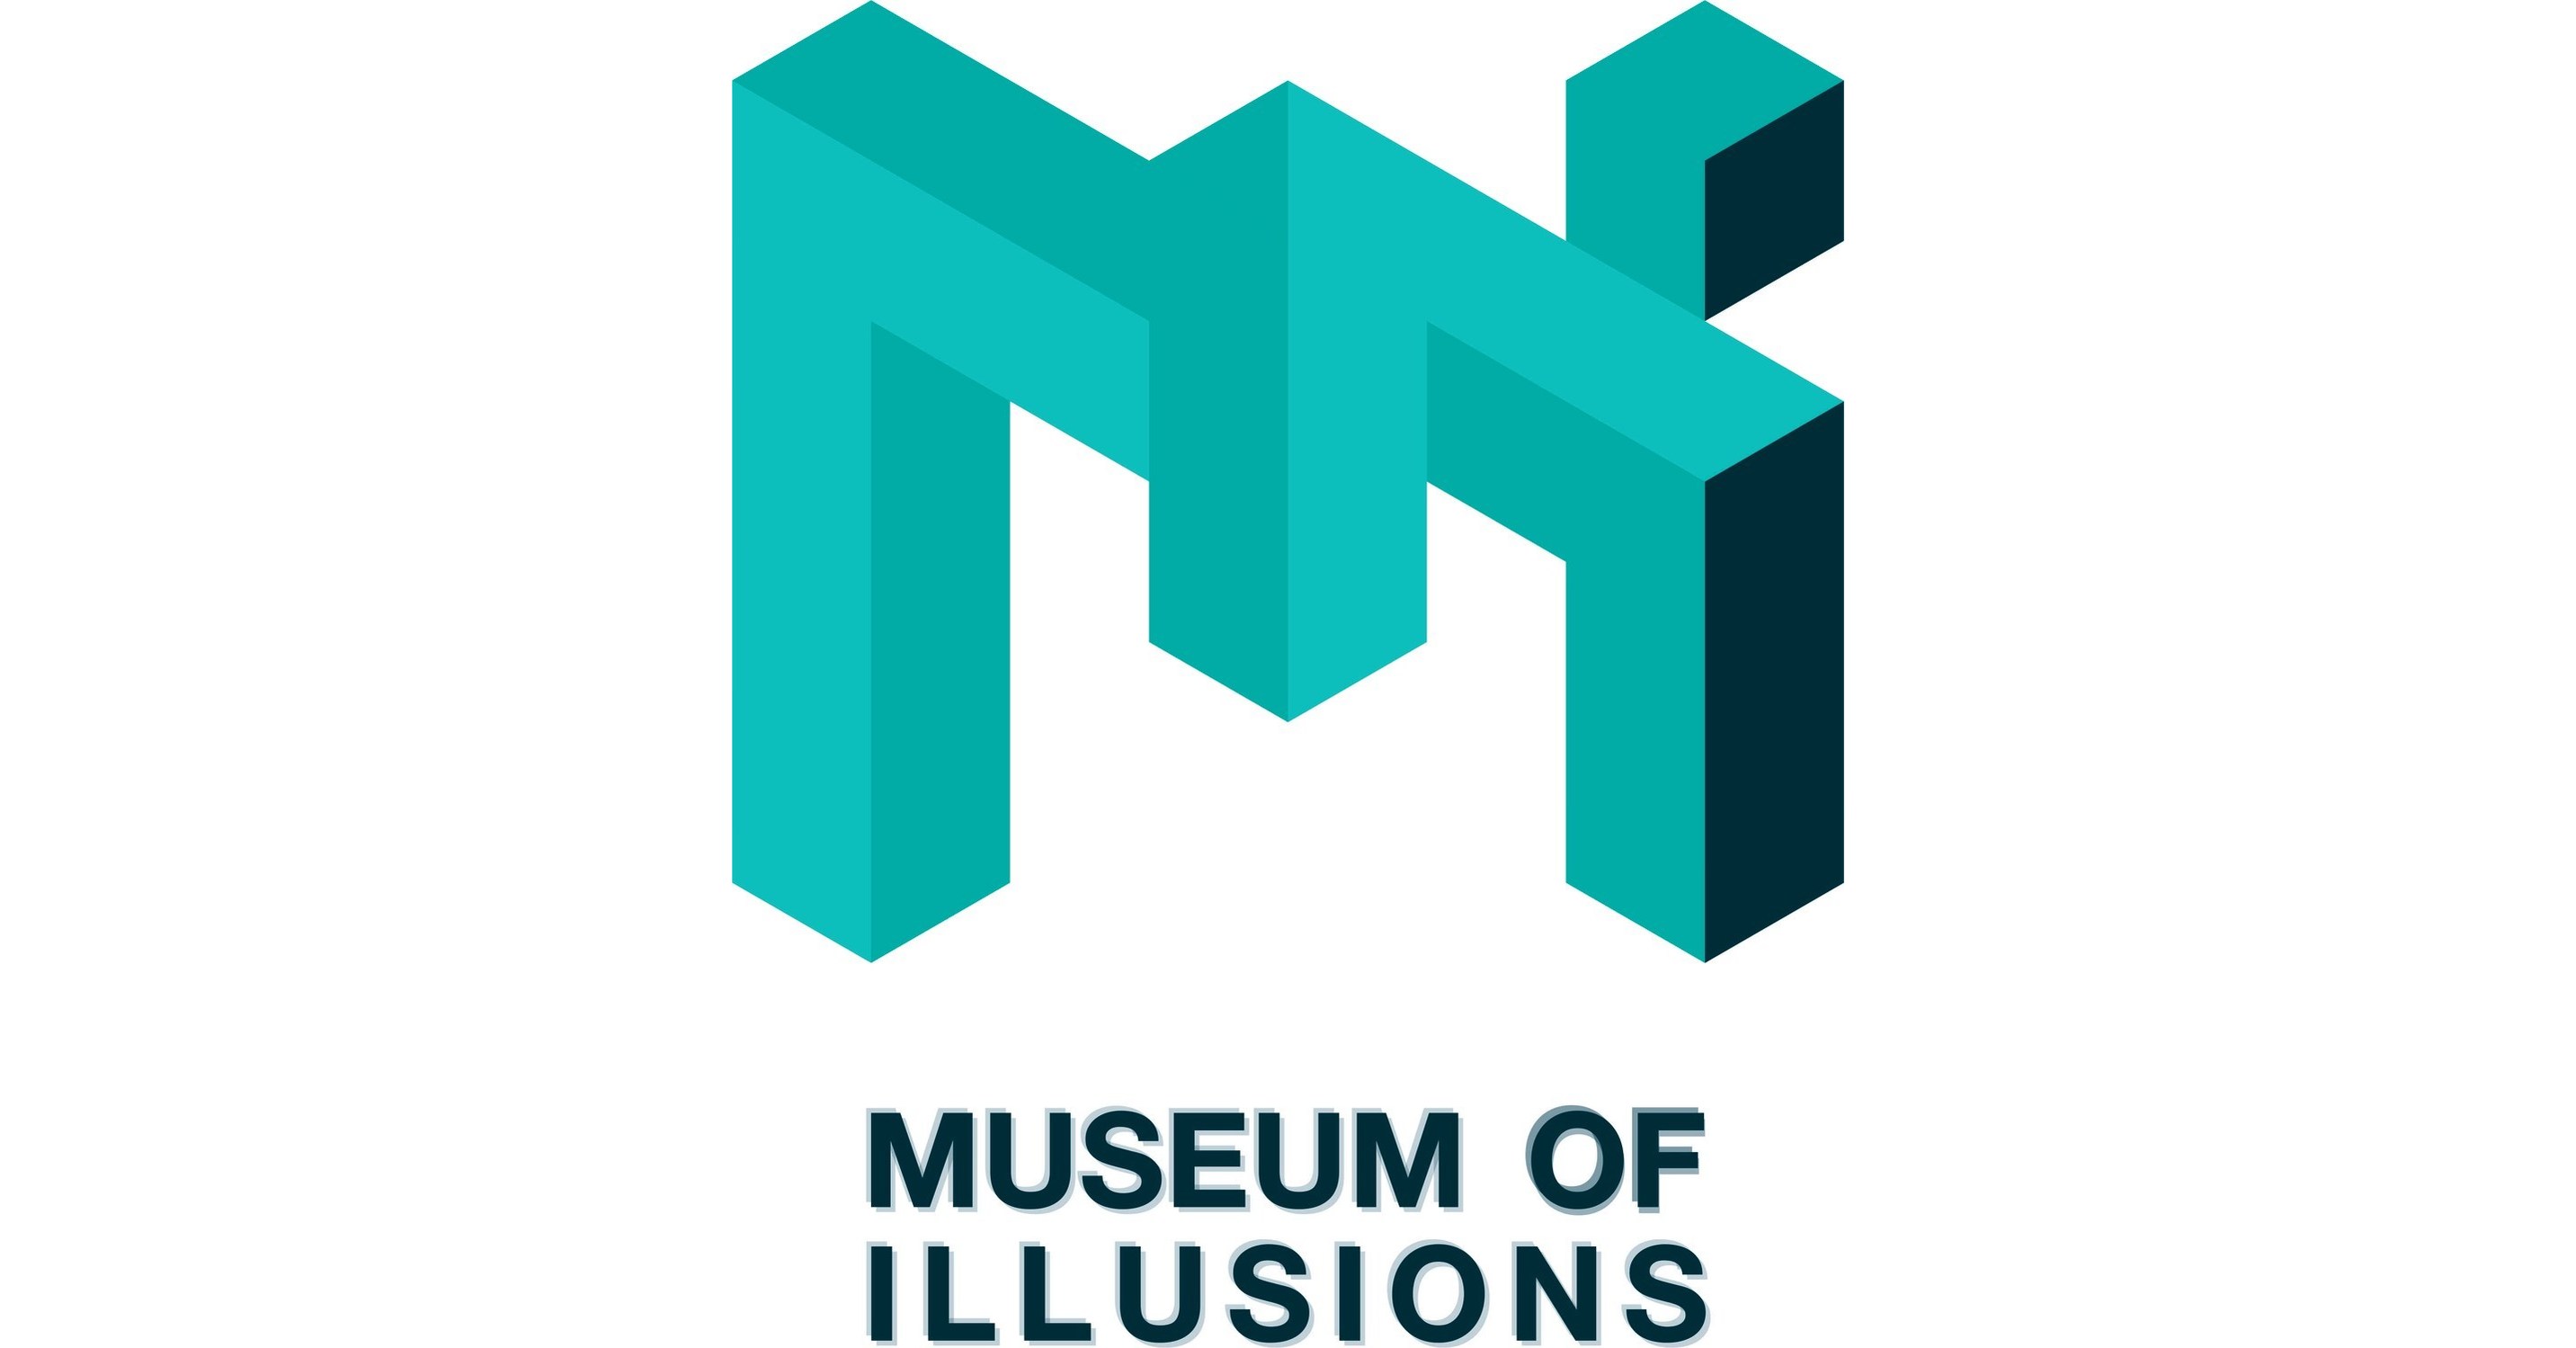 Austin Gets “Weirder” with New Museum of Illusions® Opening Soon at The Domain